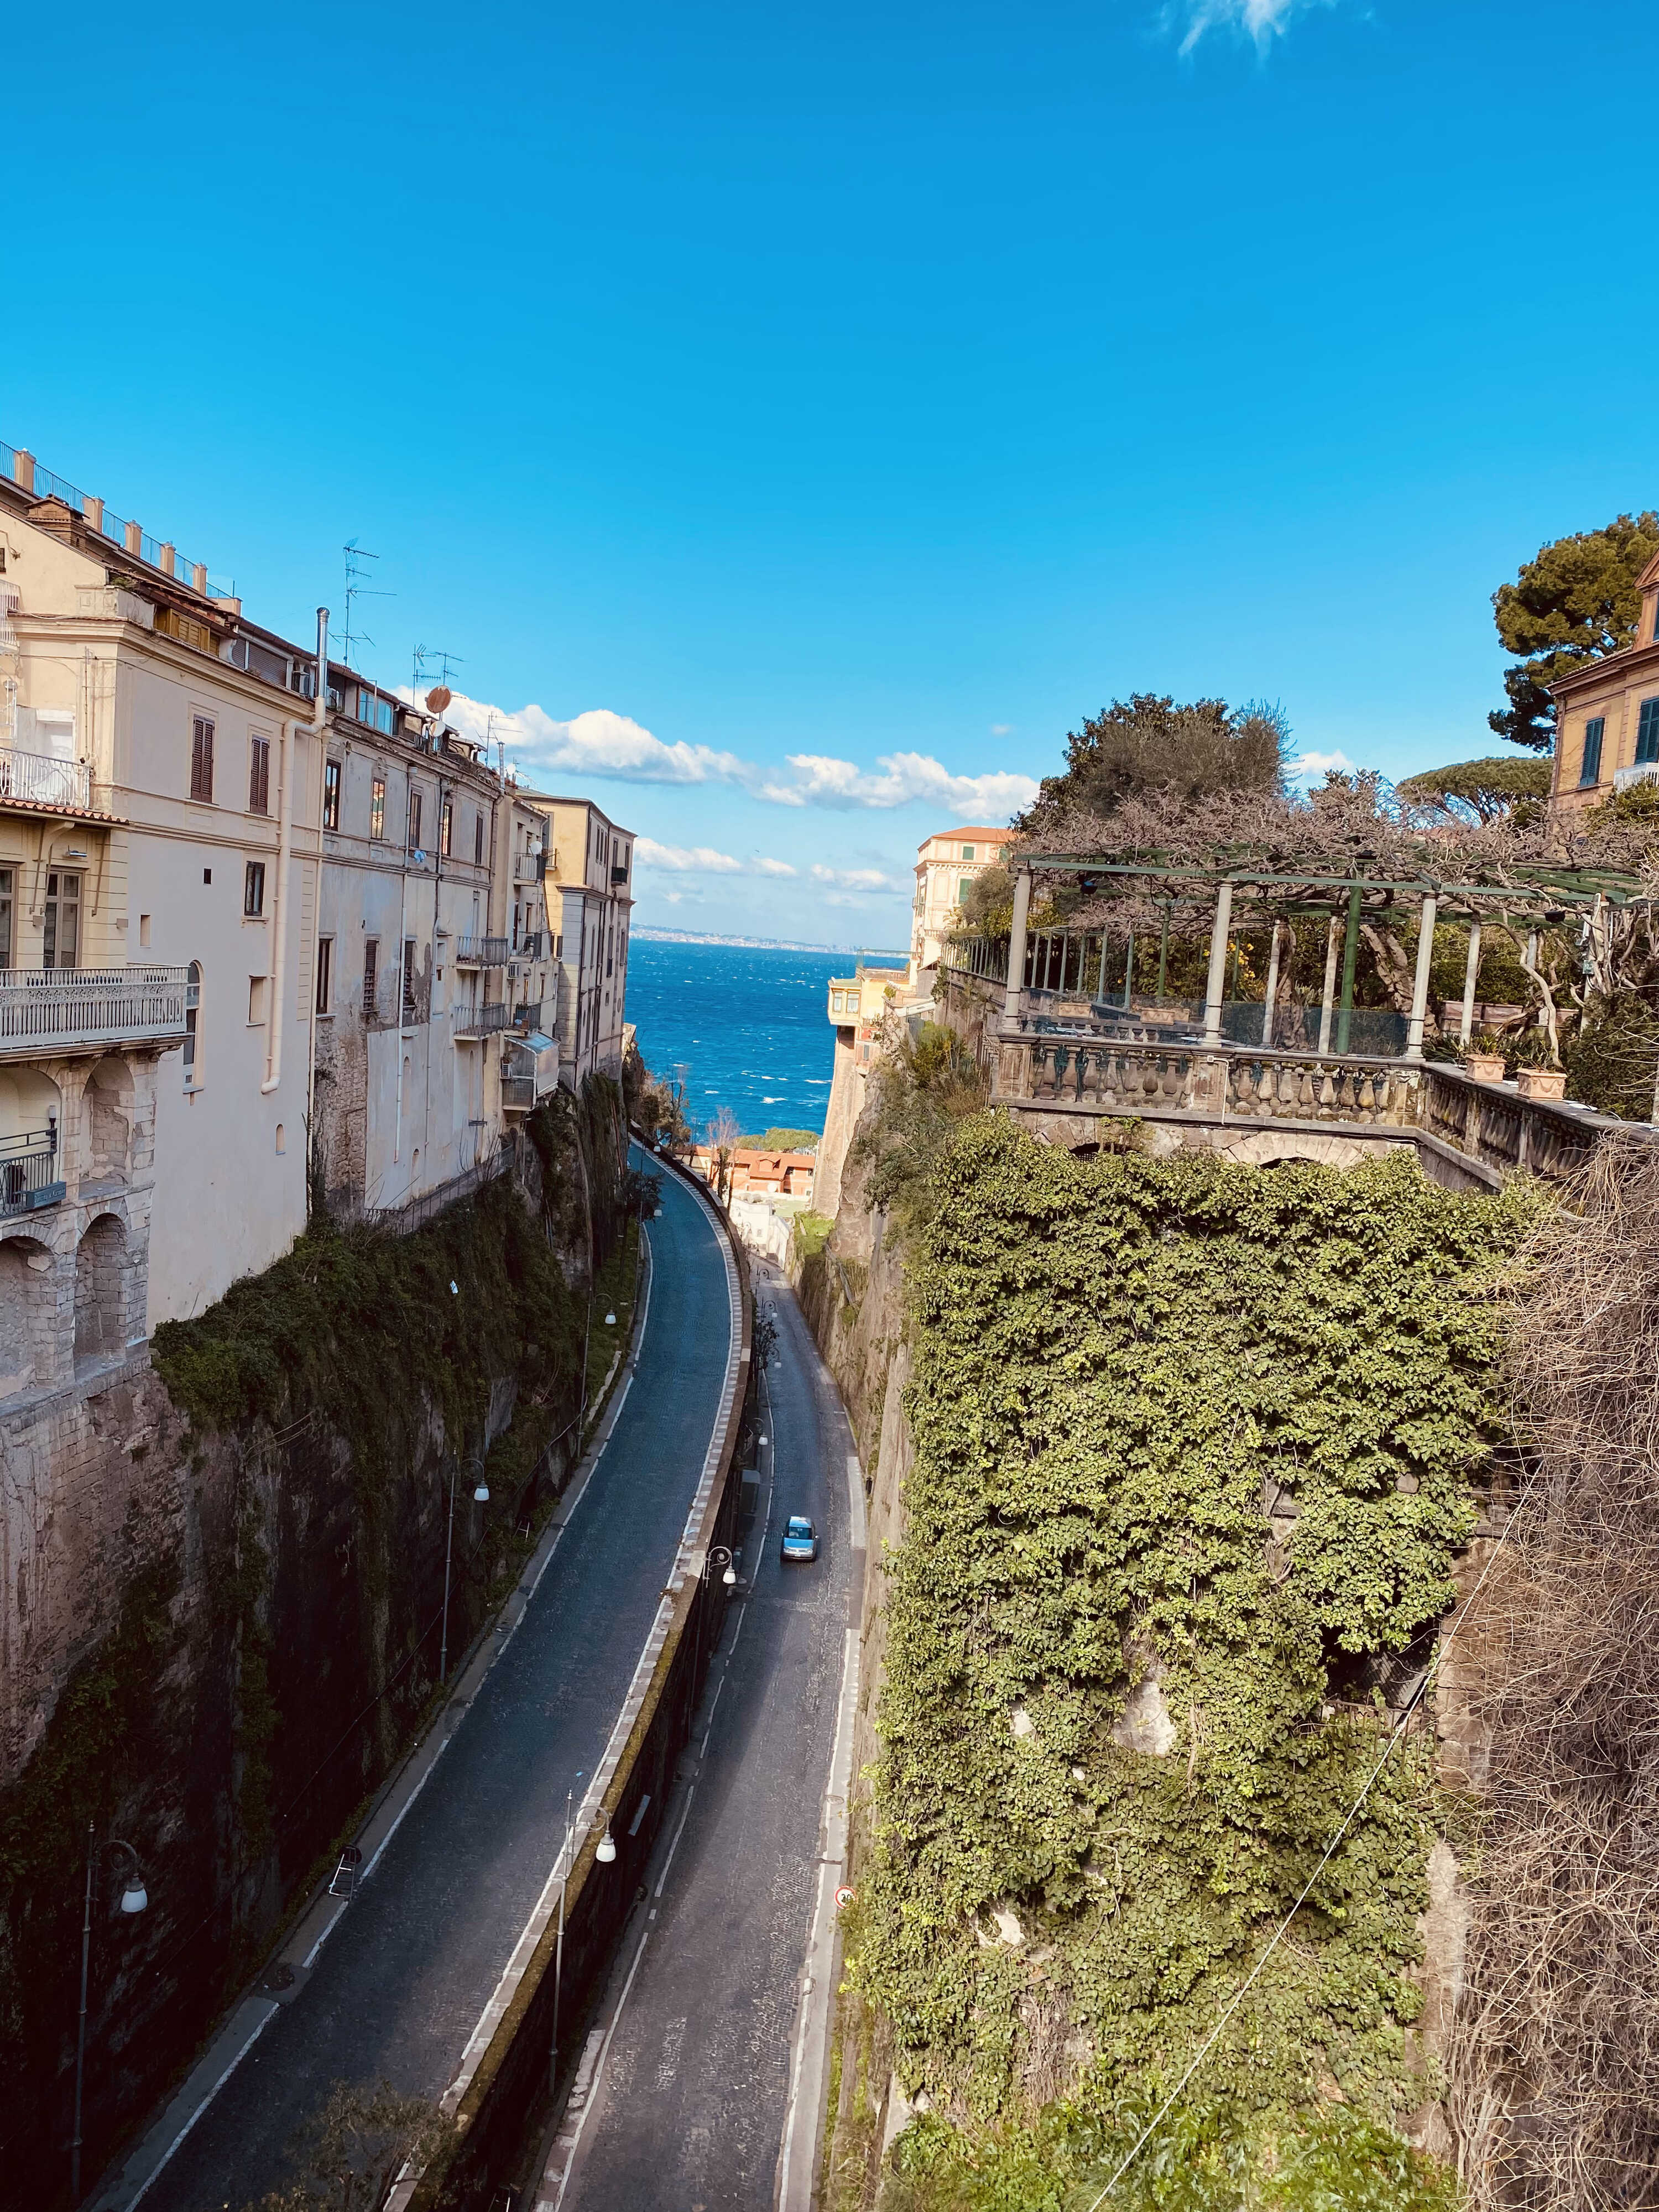 View from a bridge
        in Sorrento